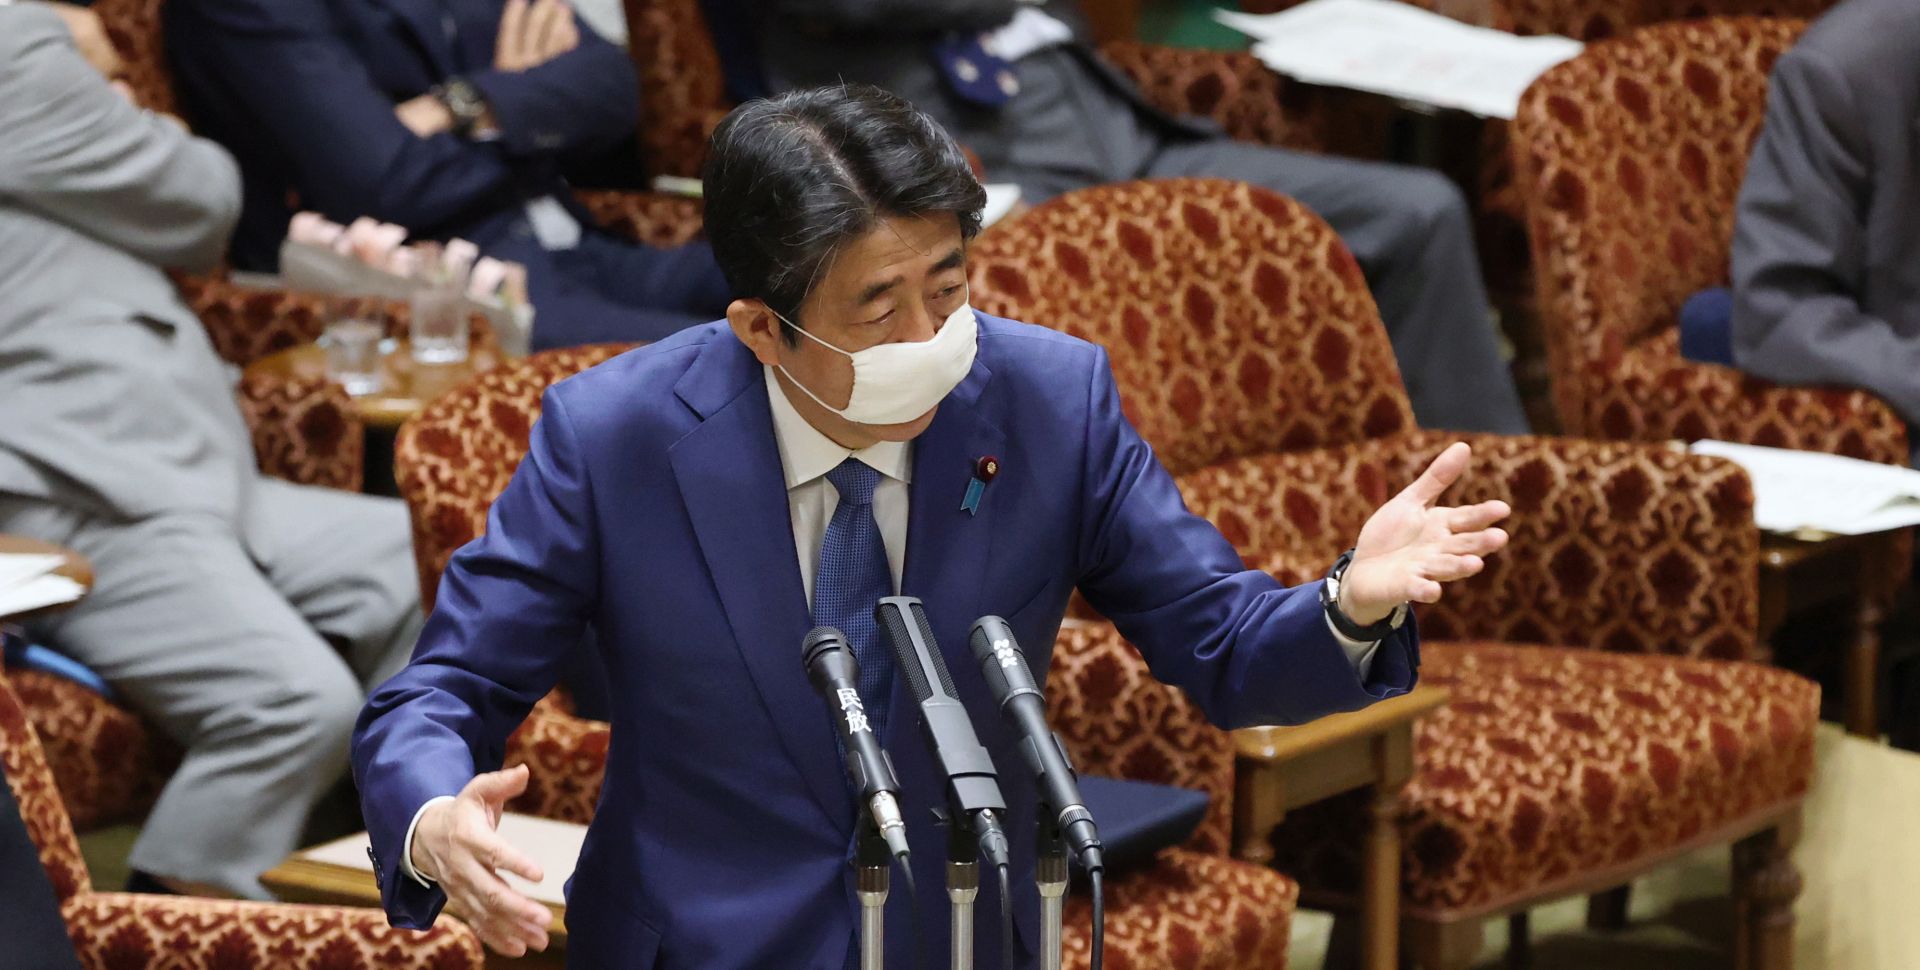 epa08392847 Japan's Prime Minister Shinzo Abe wears a face mask while speaking during a budget committee session at the parliament in Tokyo, Japan, 30 April 2020. According to latest media reports, Prime Minister Abe may extend the nationwide state of emergency scheduled to end on 06 May 2020.  EPA/JIJI PRESS JAPAN OUT EDITORIAL USE ONLY/  NO ARCHIVES